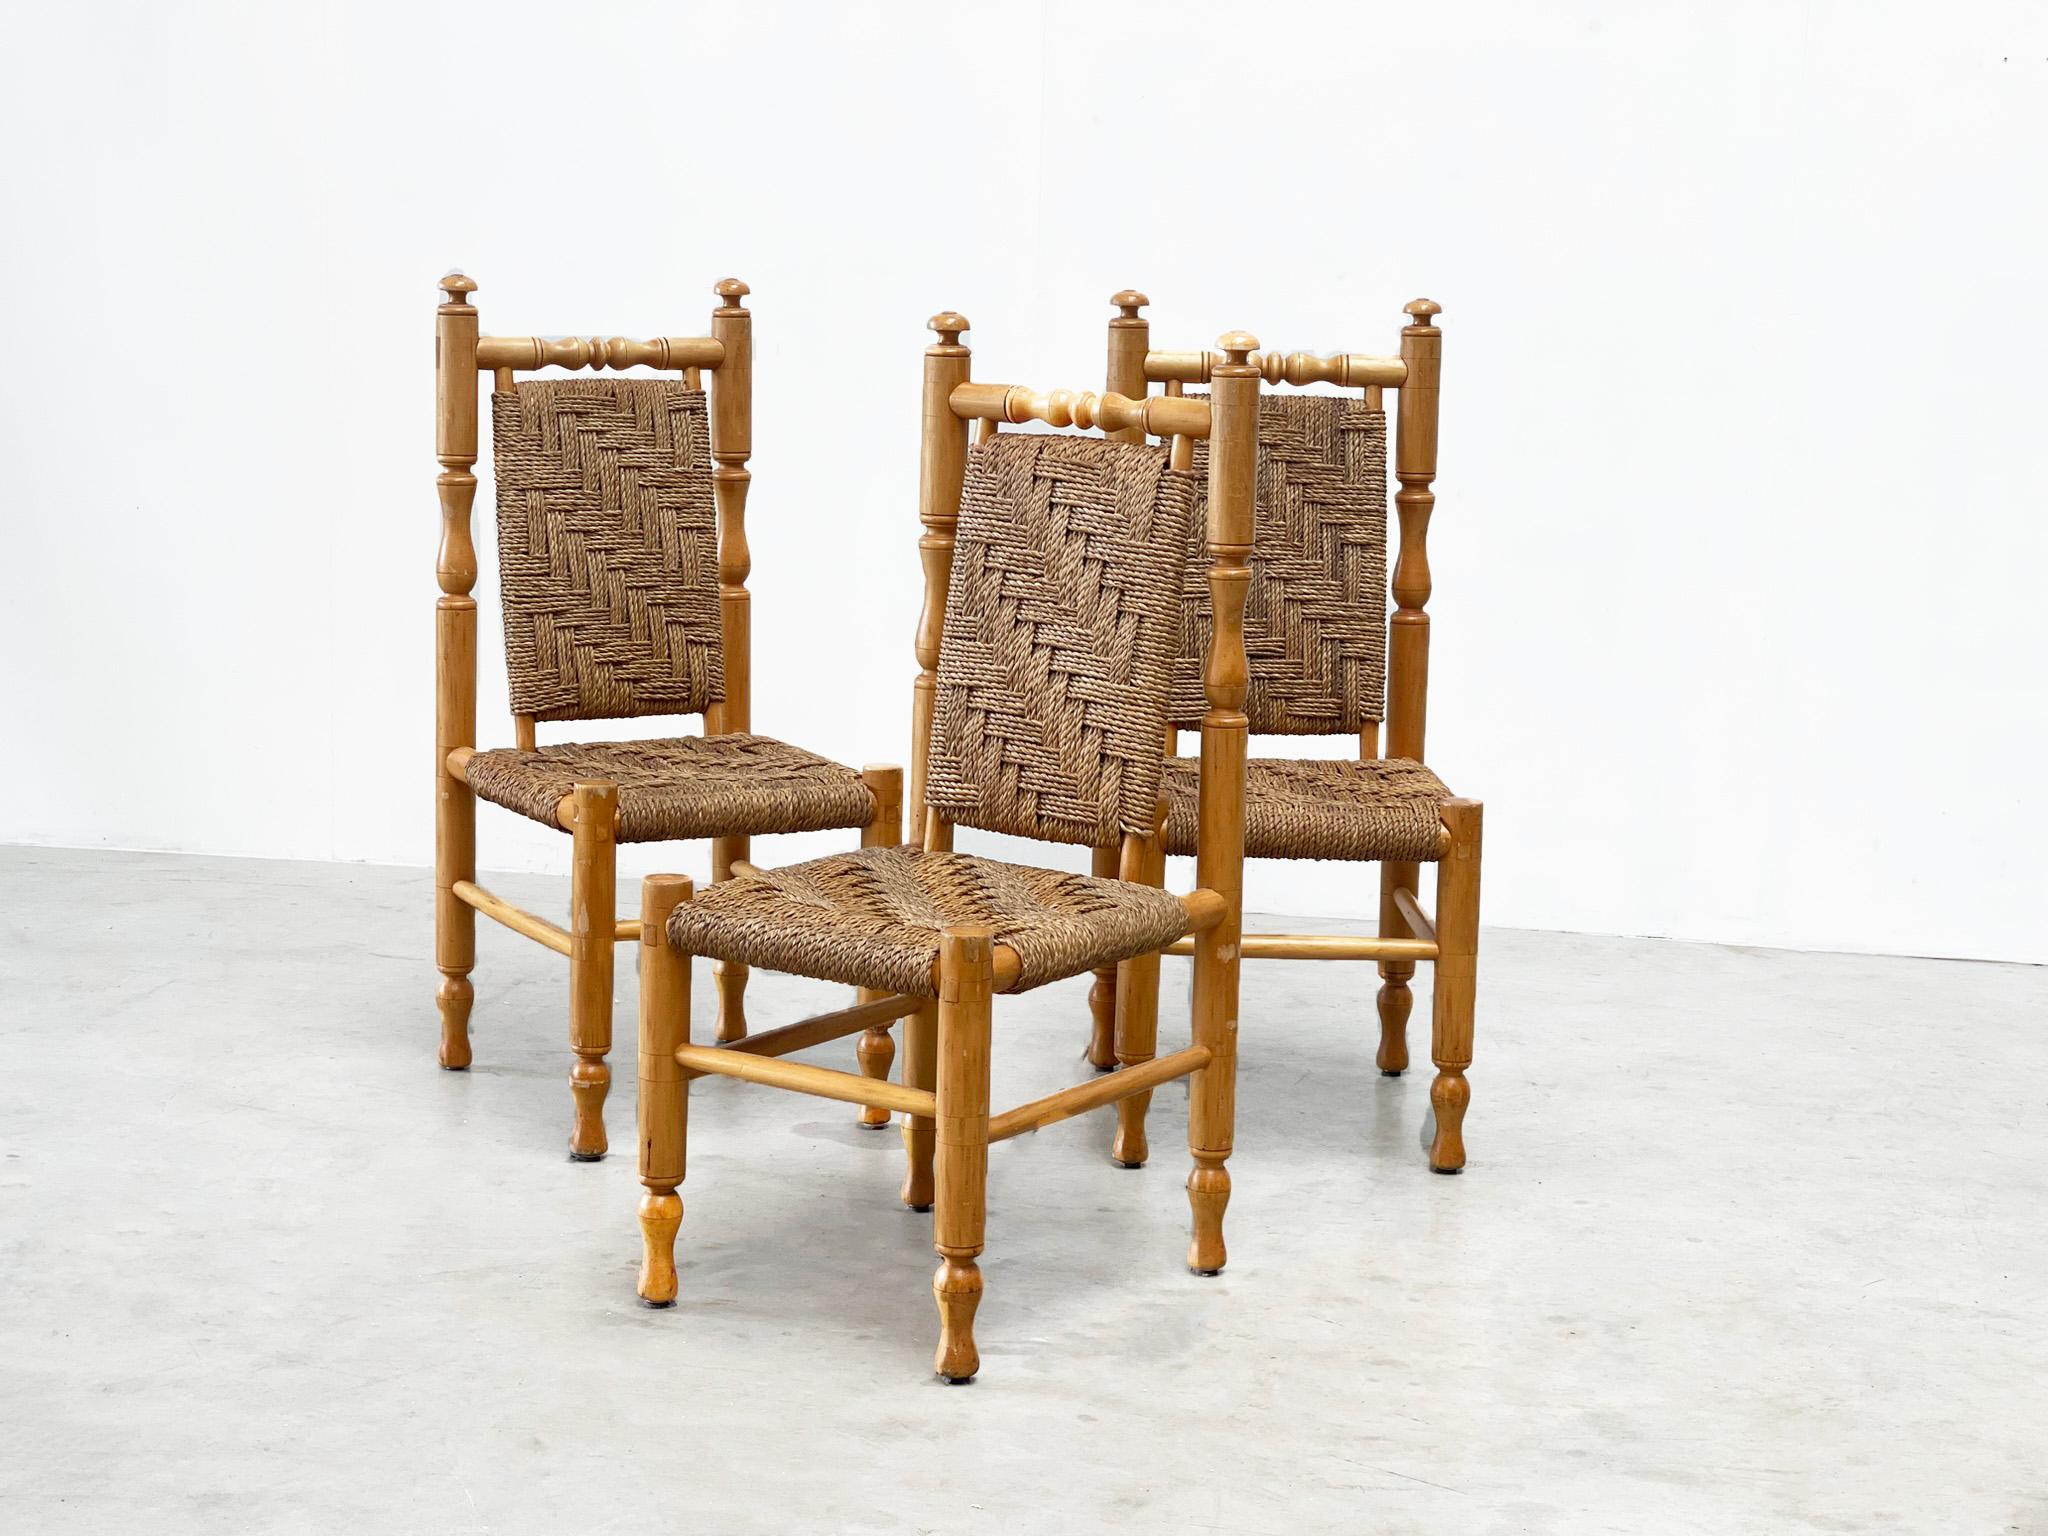 set of 3 sidechairs / dining chairs by by Adrien Audoux & Frida Minet
These chairs are from the famous French designers Adrien Audoux & Frida Minet. They were designed and manufactured in the 1970s. The chairs were made in 70's and have gained a